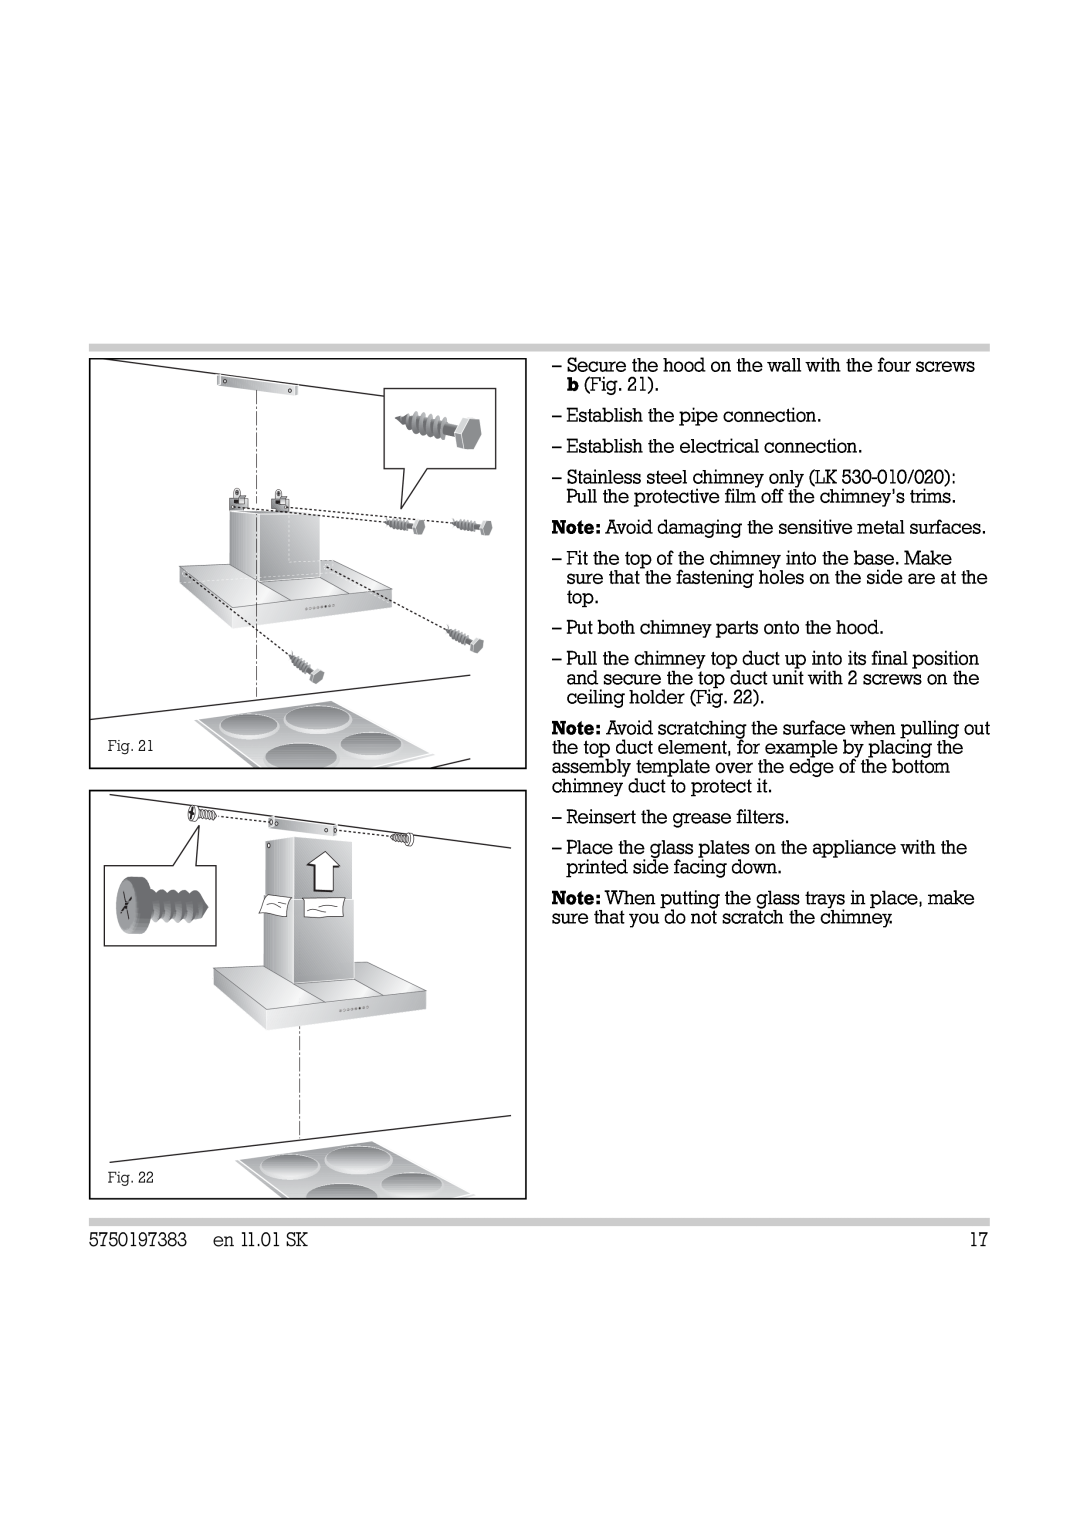 Gaggenau AH 530-720 manual Secure the hood on the wall with the four screws b Fig, Put both chimney parts onto the hood 